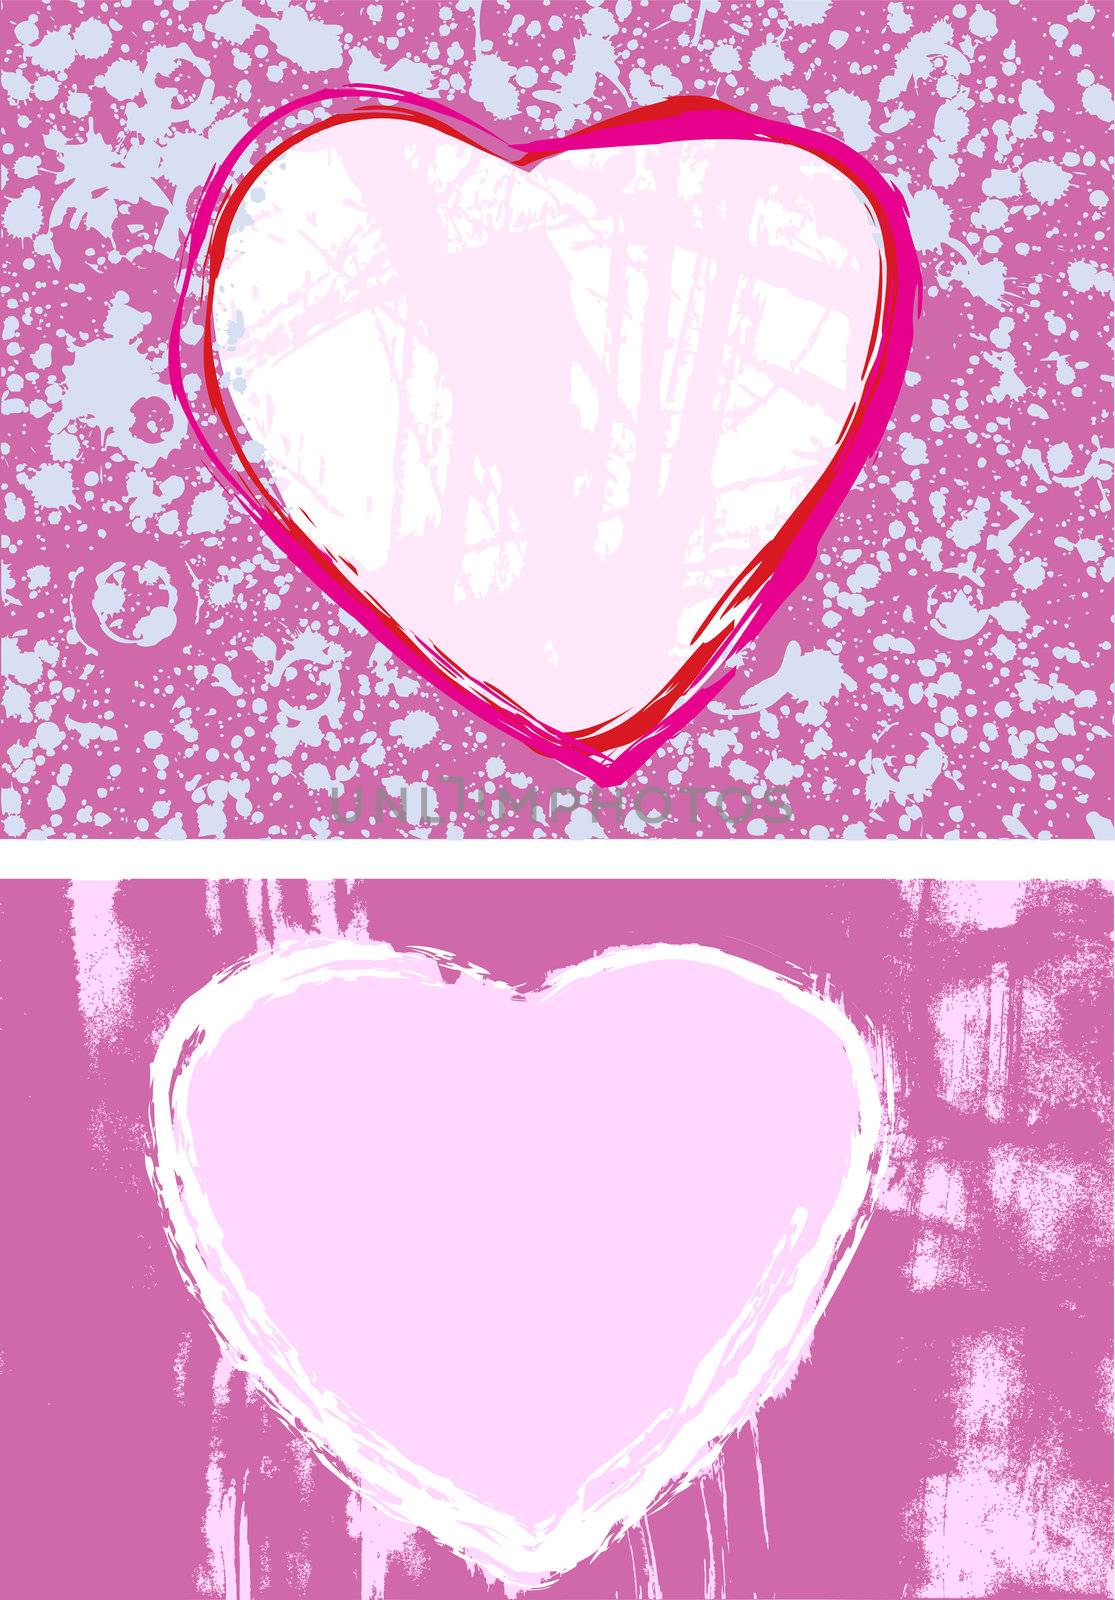 Pair of hand-drawn ink heart-shaped grunge style frames